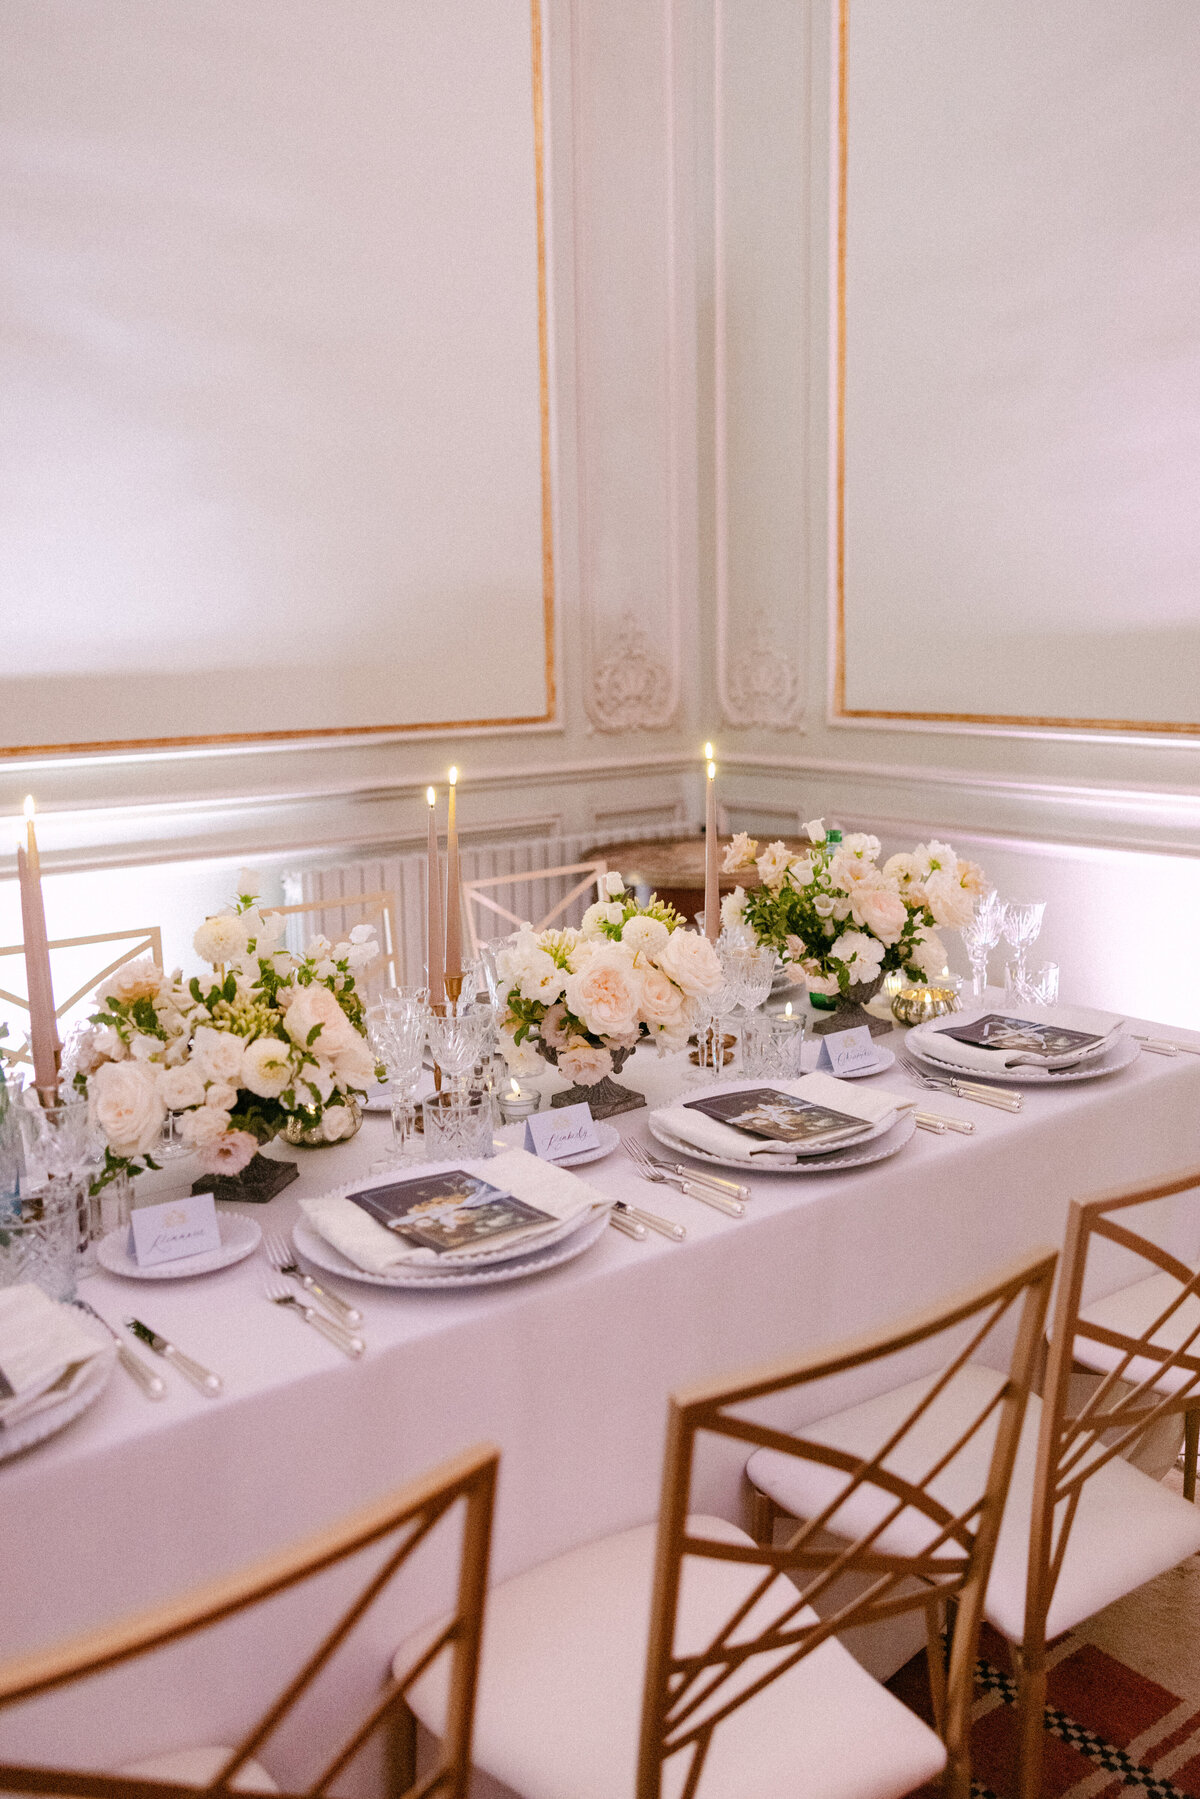 Jennifer Fox Weddings English speaking wedding planning & design agency in France crafting refined and bespoke weddings and celebrations Provence, Paris and destination wd824